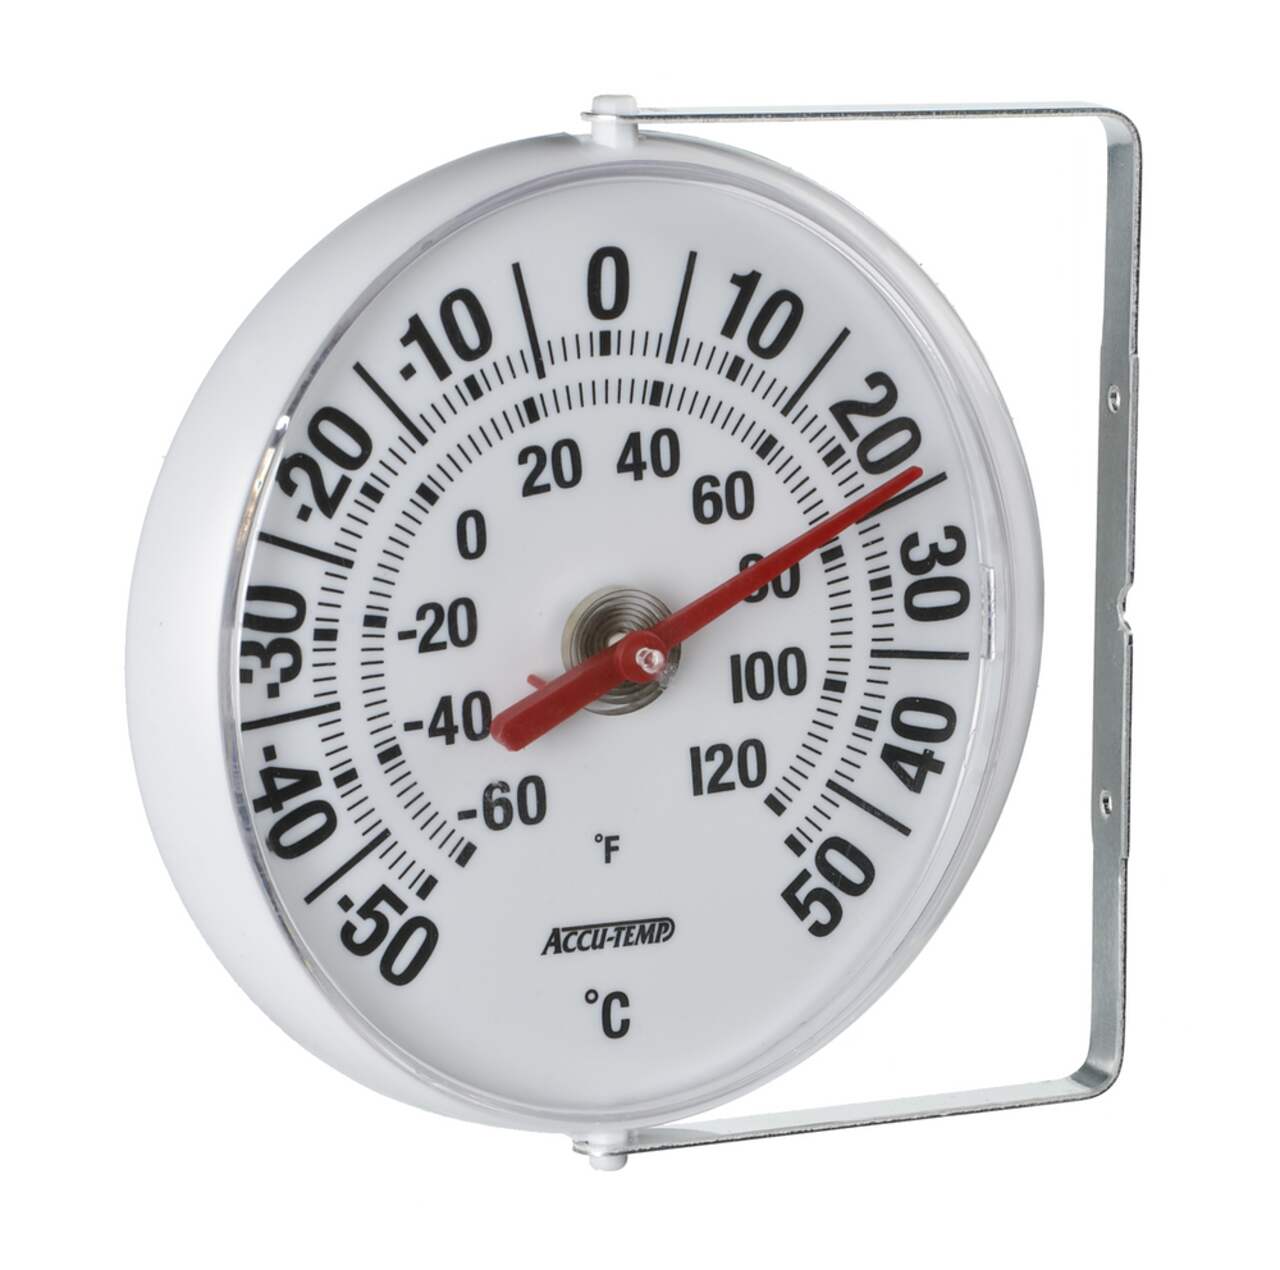 https://media-www.canadiantire.ca/product/living/kitchen/kitchen-tools-thermometers/0429124/5-5-round-indoor-outdoor-thermometer-40c8c4d9-9a7b-4d95-a3de-95643edf7a20.png?imdensity=1&imwidth=640&impolicy=mZoom